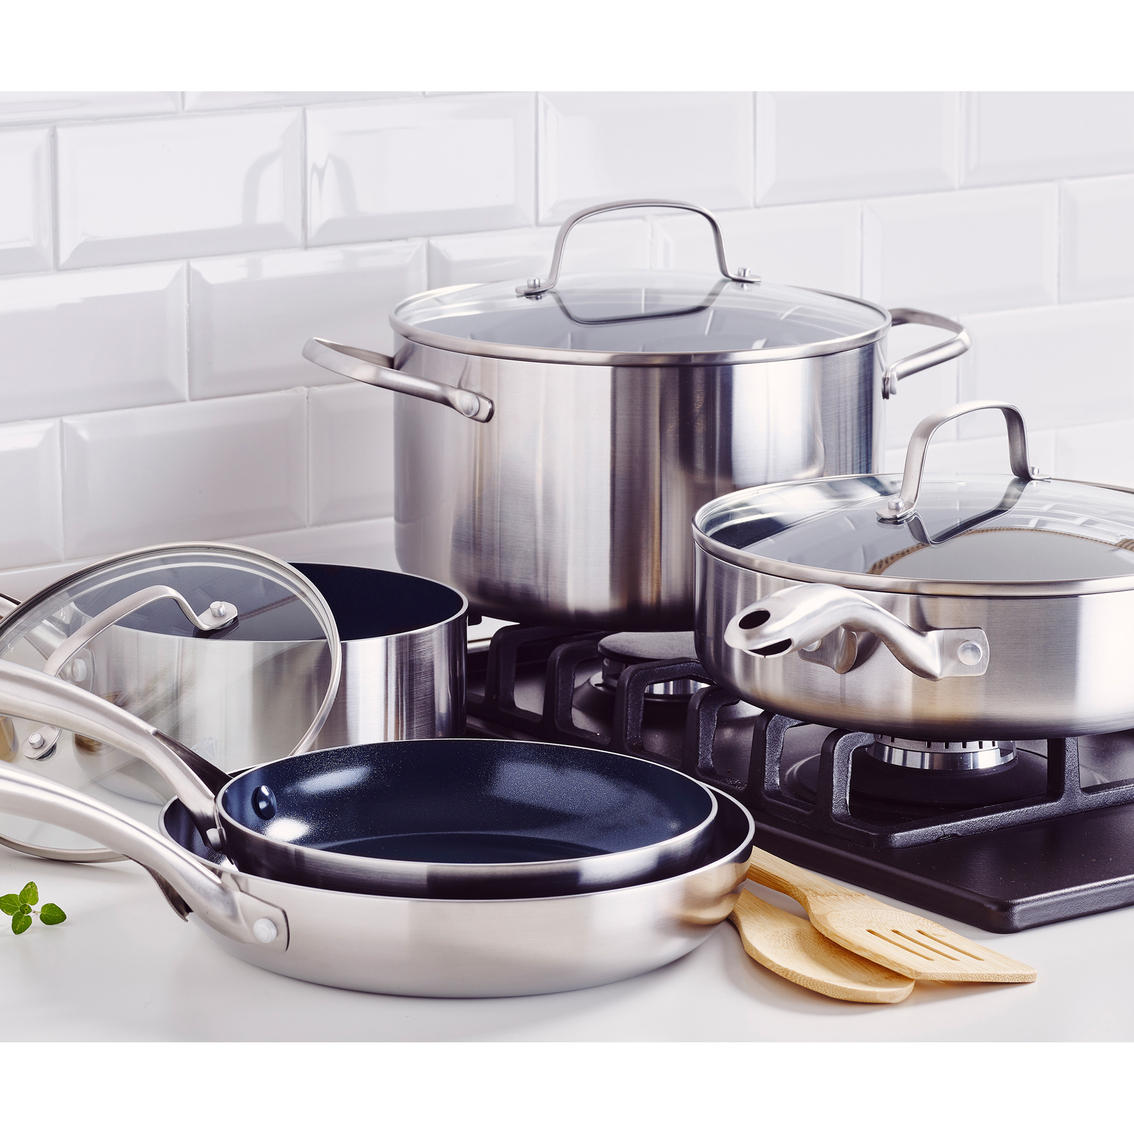 Blue Diamond Stainless Clad Pro 10 pc. Cookware Set - Image 2 of 2